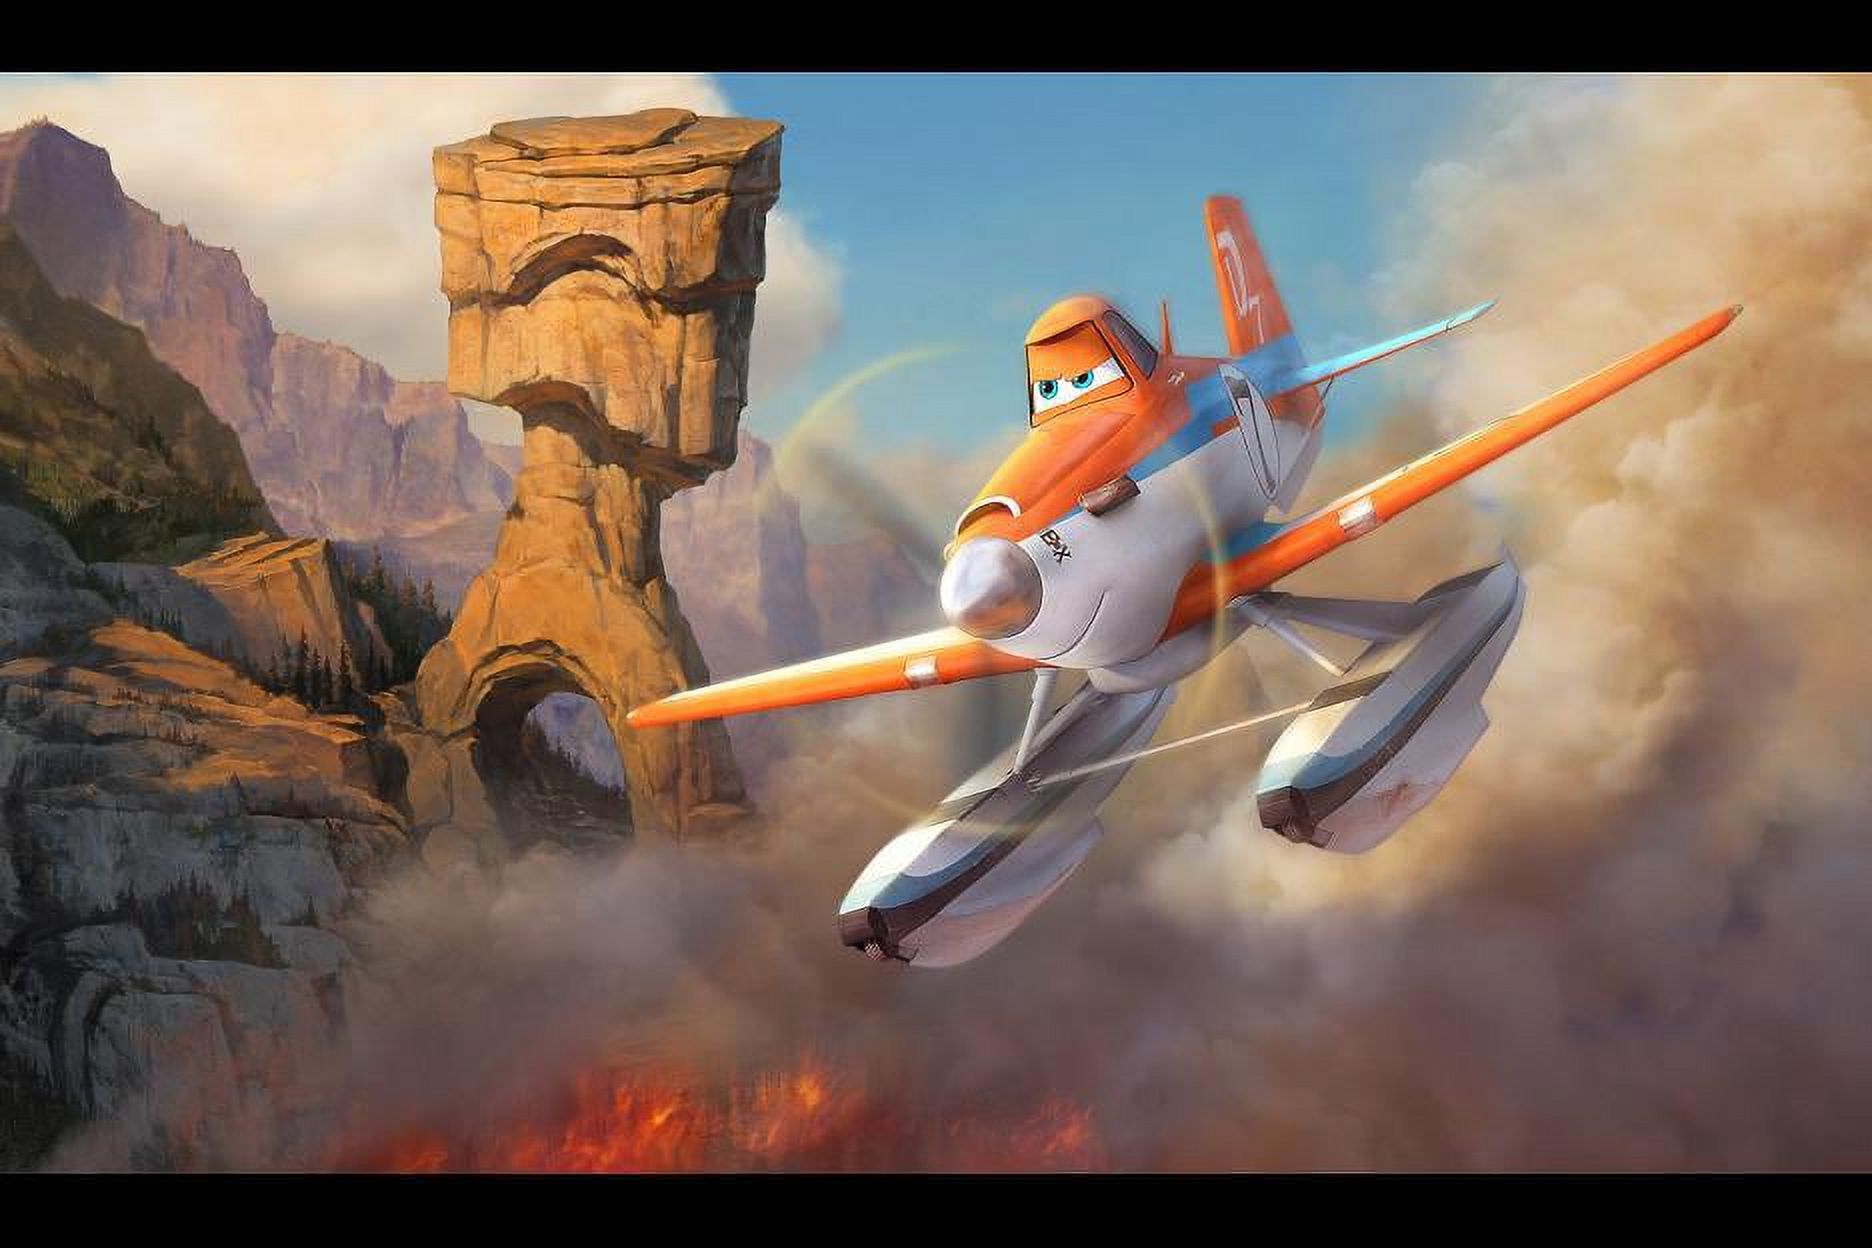 Planes Fire & Rescue (Blu-ray + DVD + Digital Code) - image 2 of 5